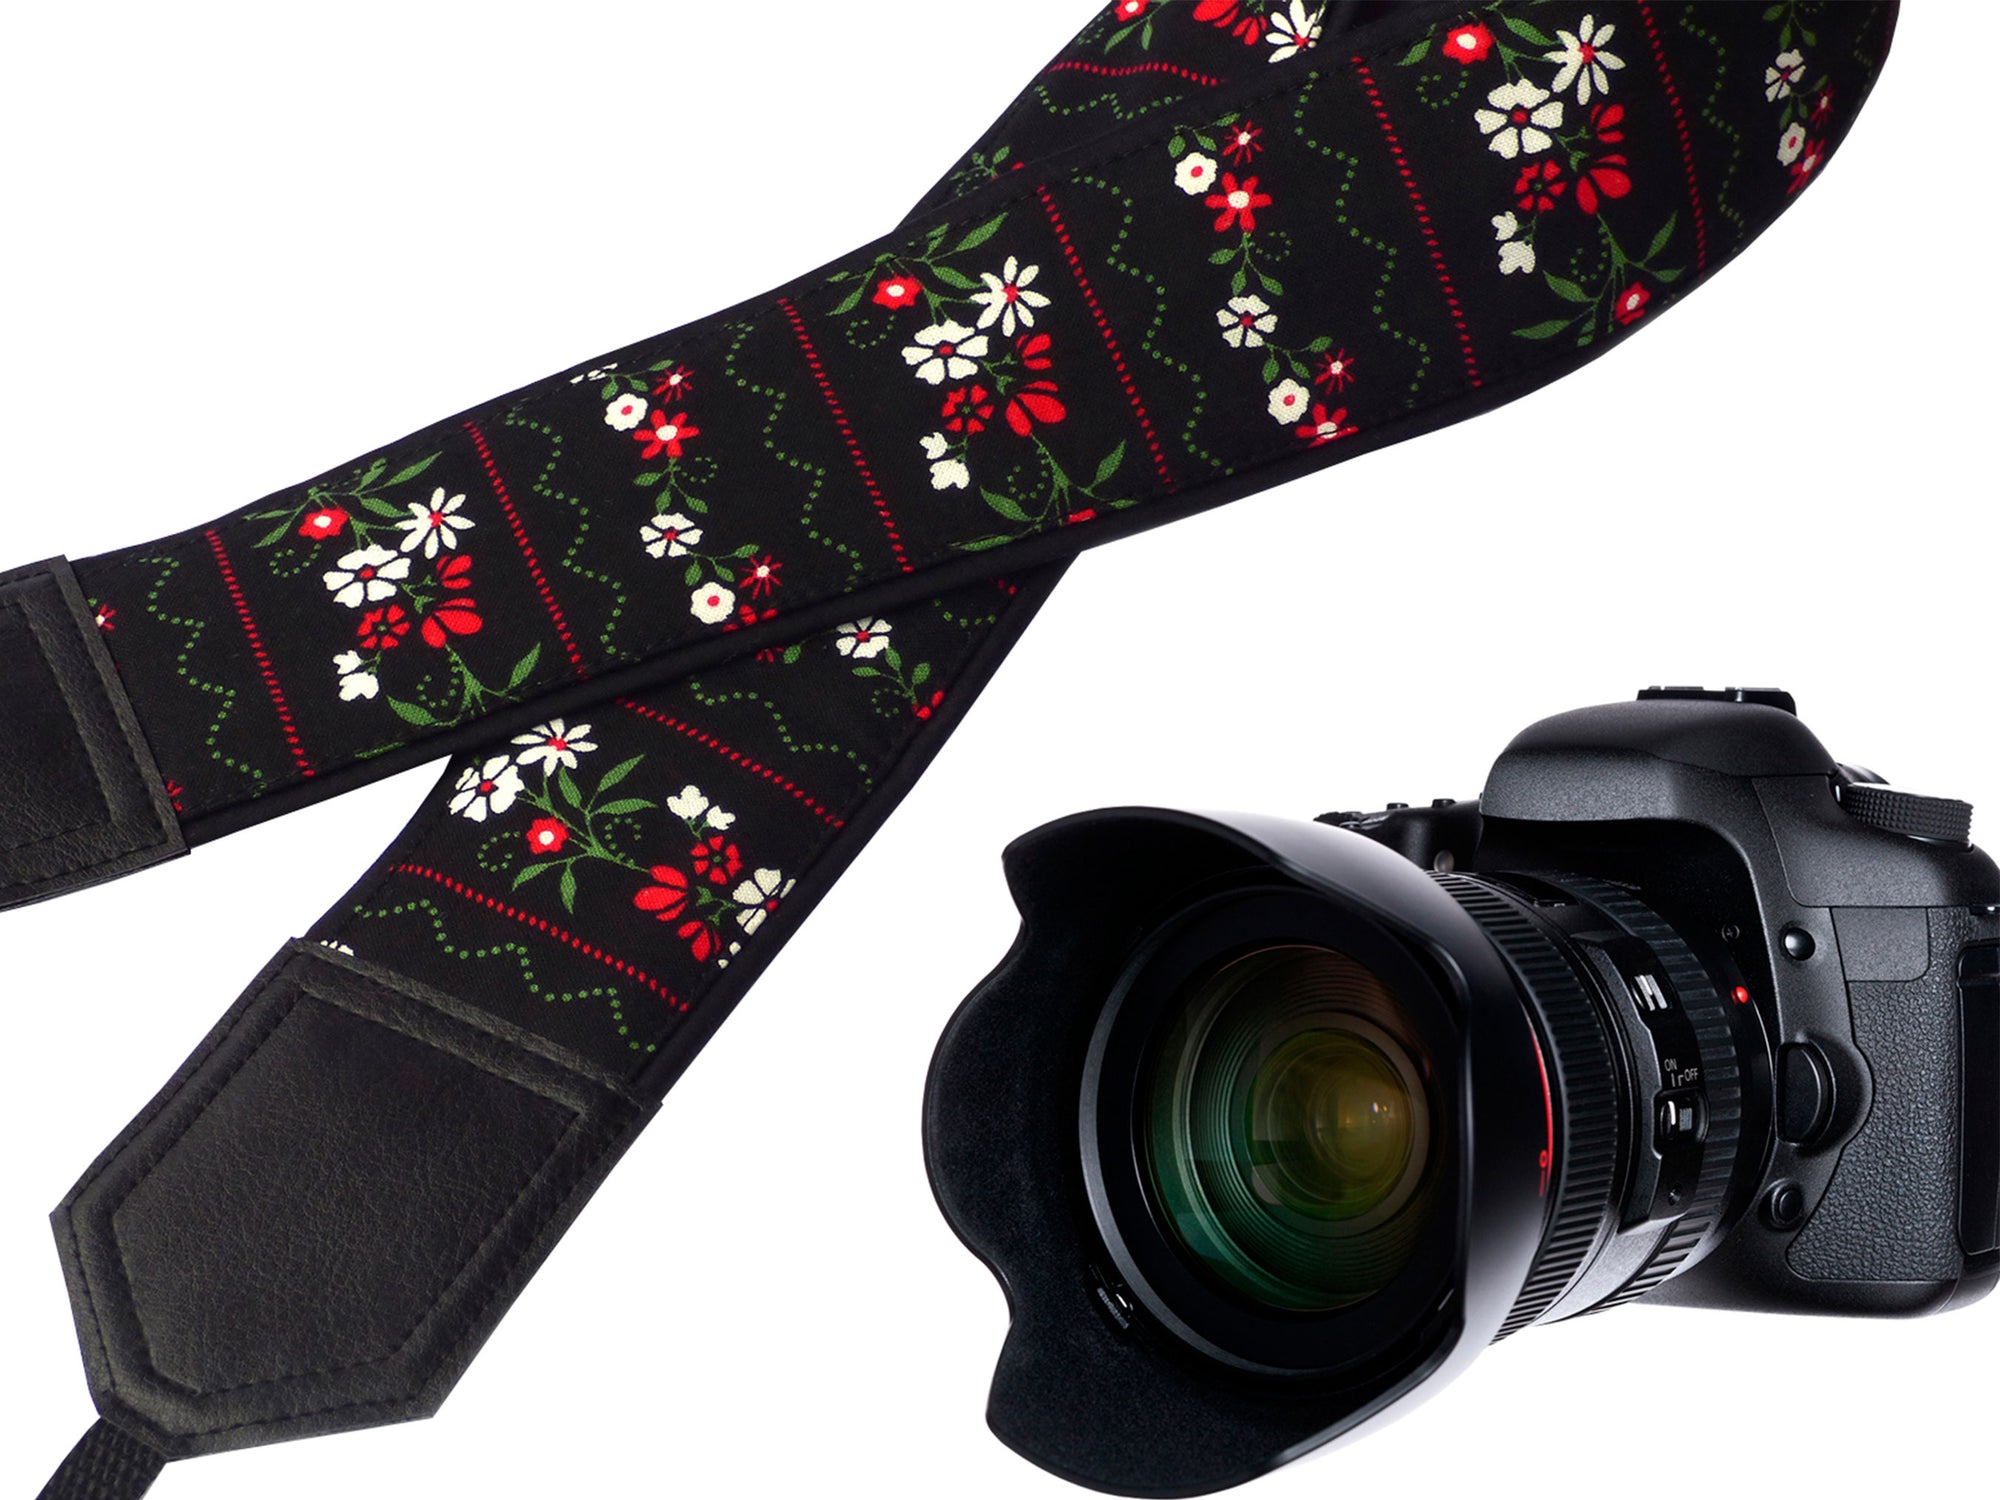 Flowers Camera strap.  Black Camera Strap DSLR / SLR. Camera accessories. Durable, light weight and well padded camera straps.